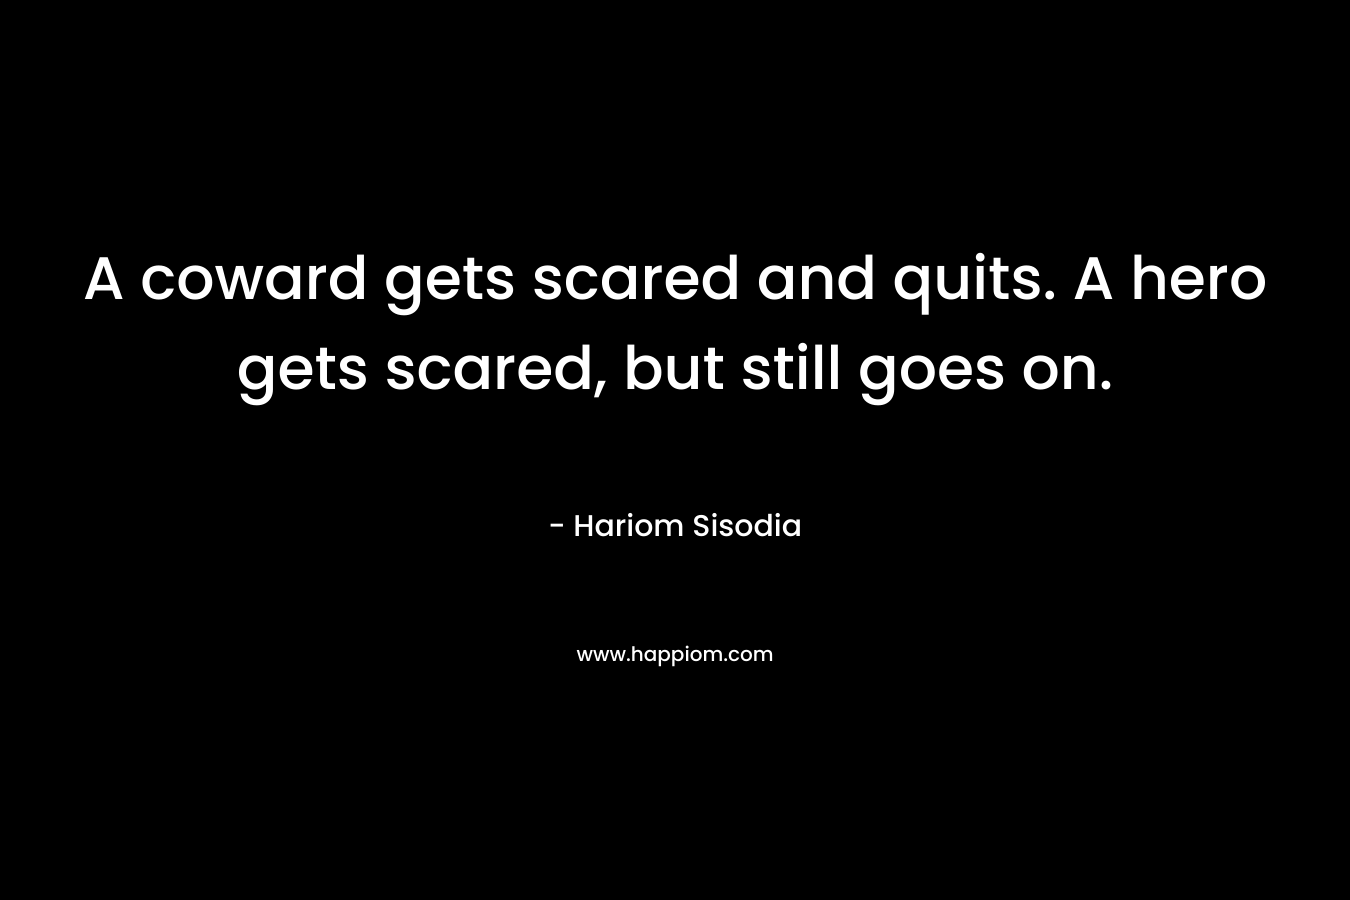 A coward gets scared and quits. A hero gets scared, but still goes on.